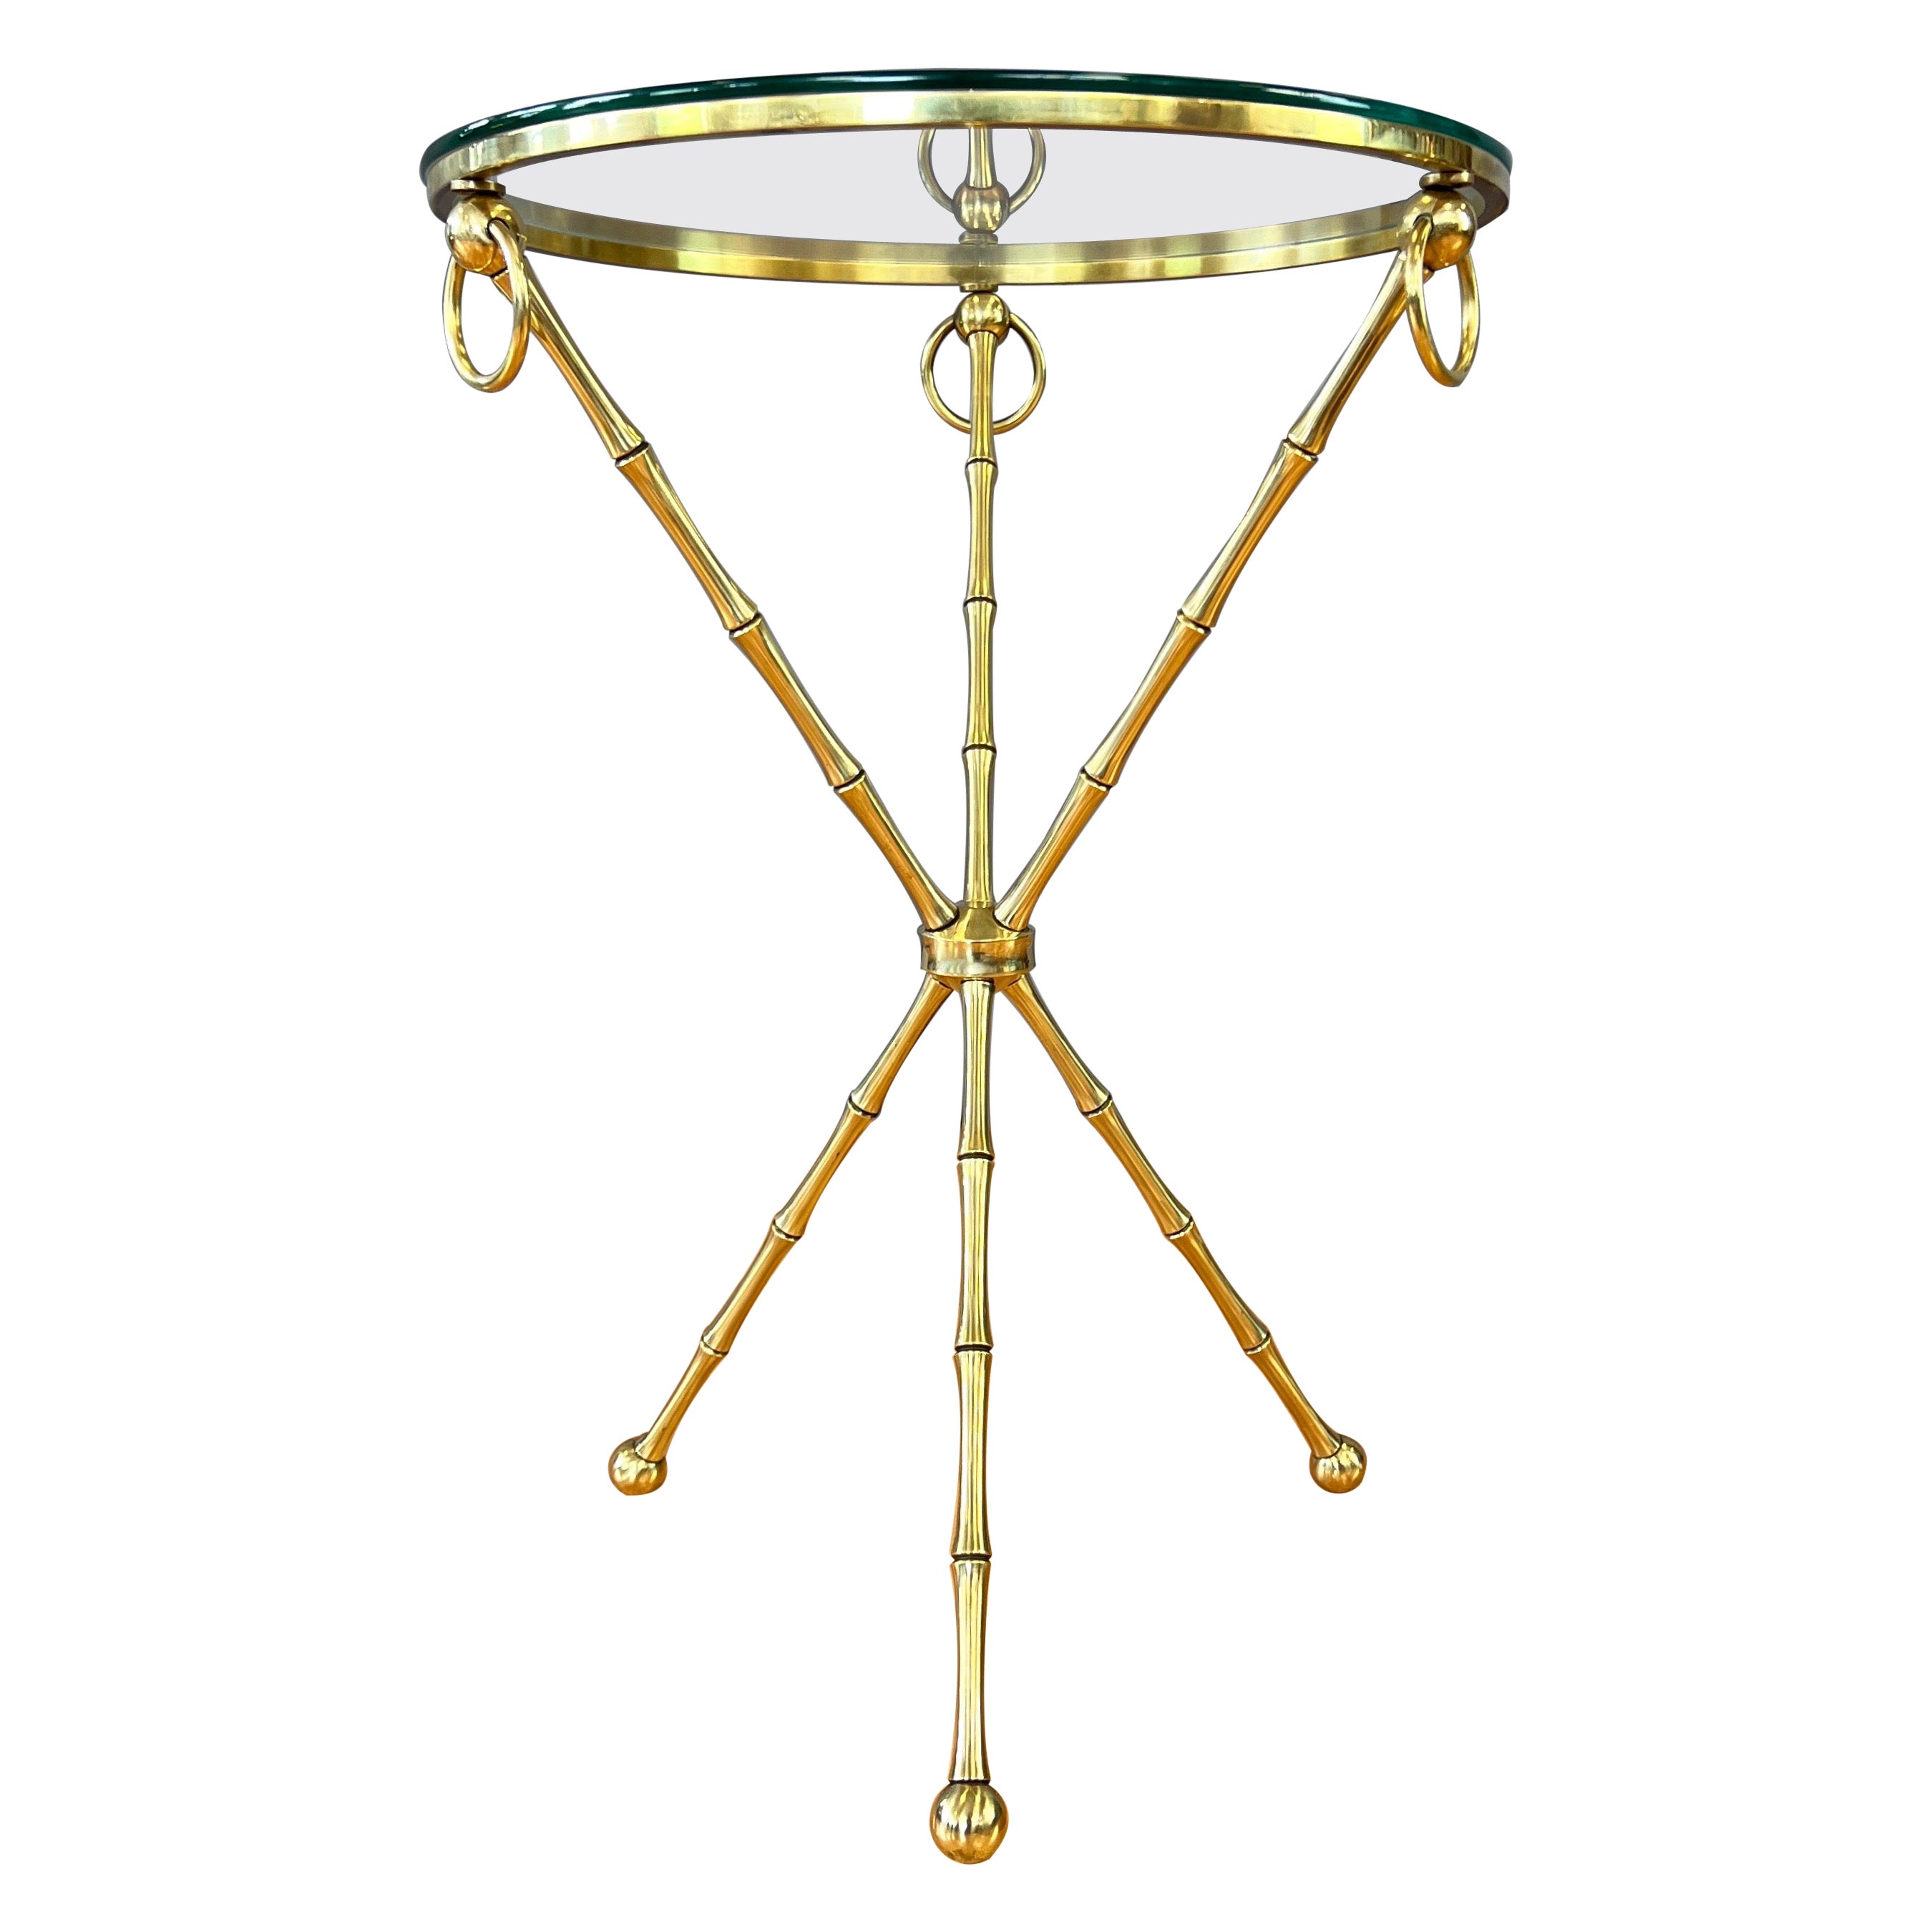 Maison Baguès-Style Brass Faux Bamboo Side Table with Round Glass Top, c. 1960